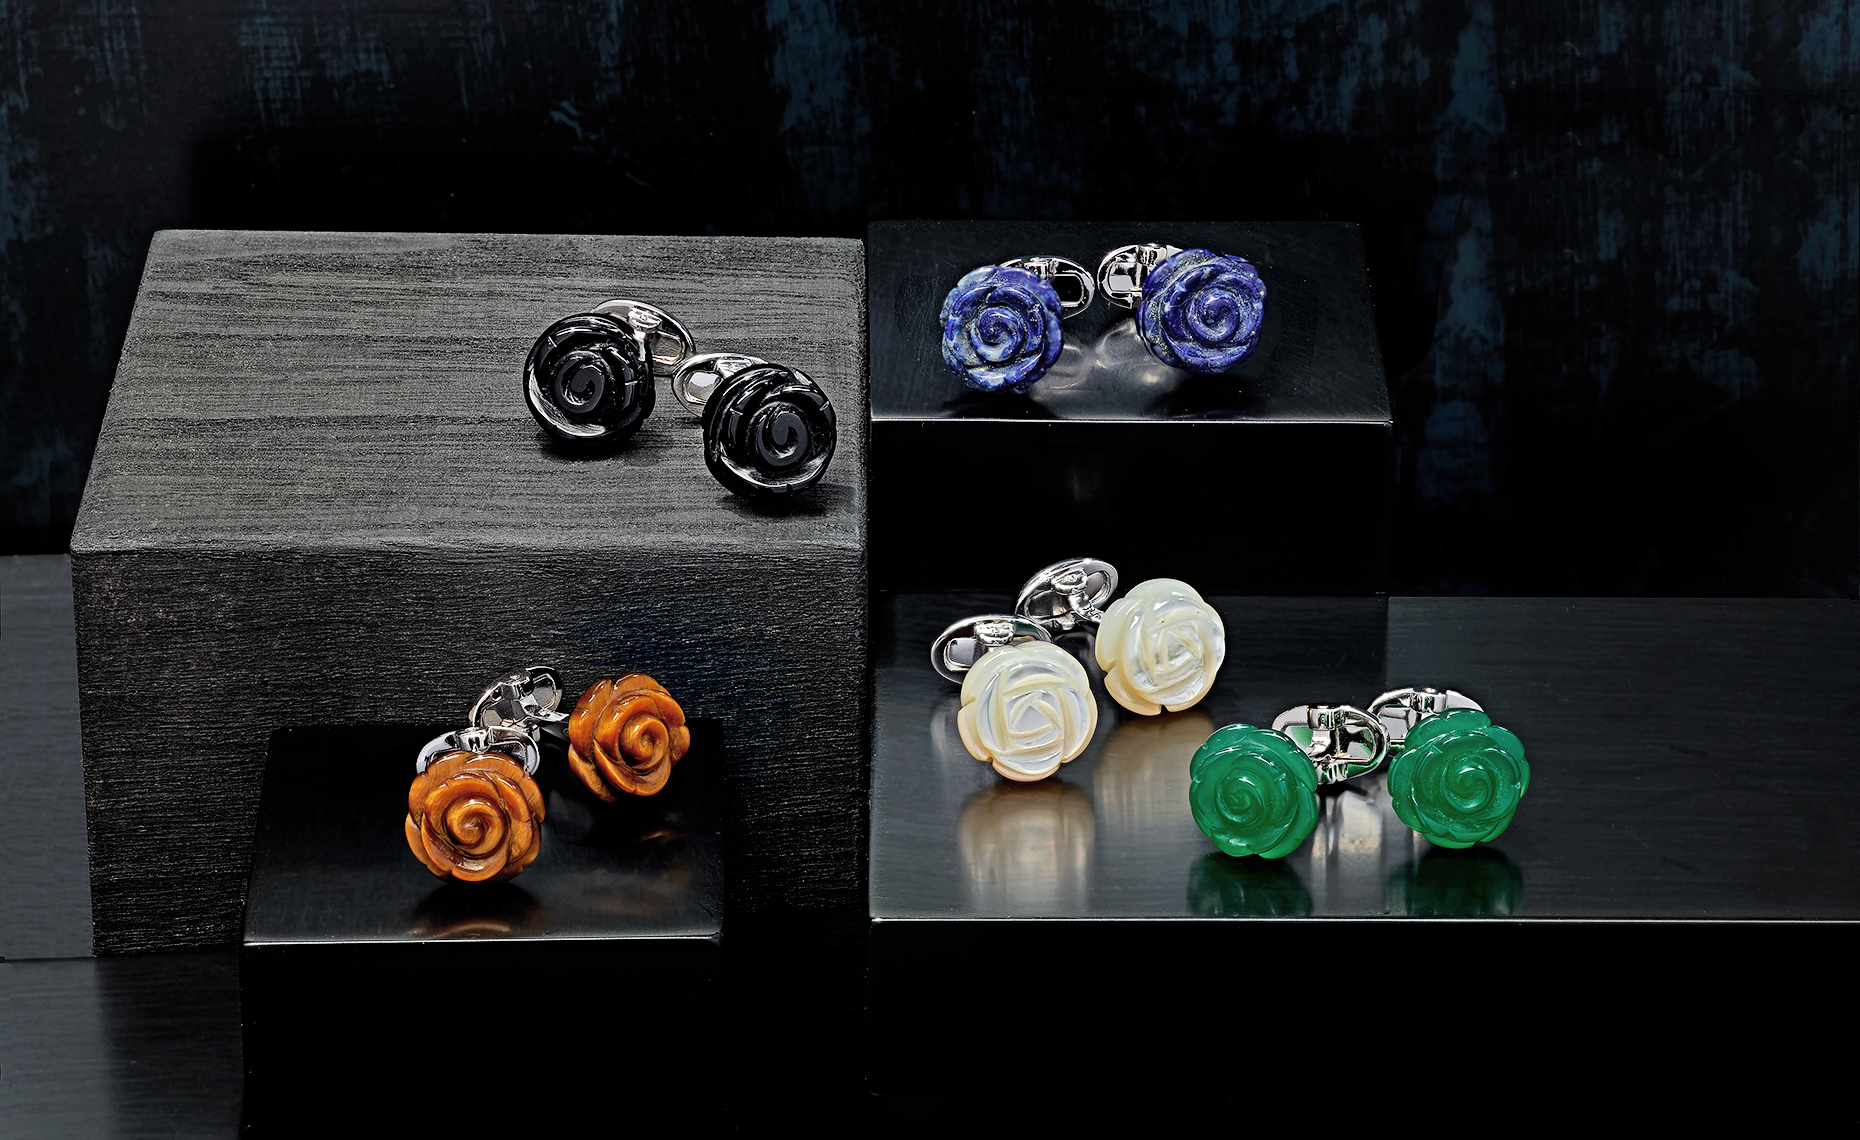 Luxurious Rose cufflinks by Jan Leslie photographed by Jewelry photographer David Lewis Taylor.